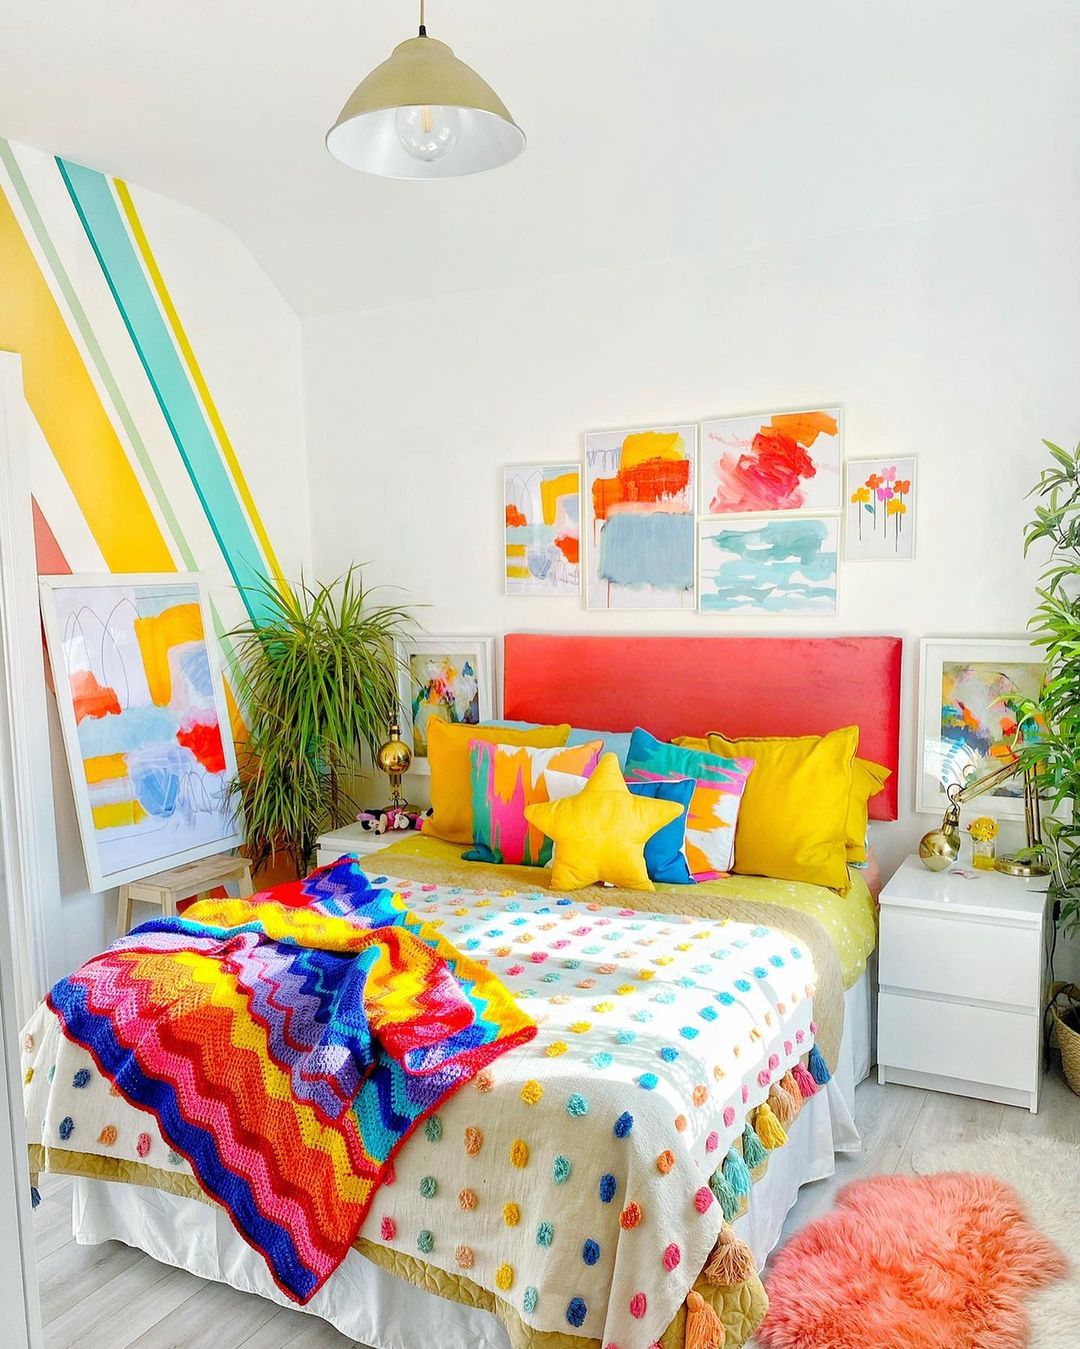 Kids Bedroom Painted White with Rainbow Colors on the Wall. Photo by Instagram user @rowans_rainbow